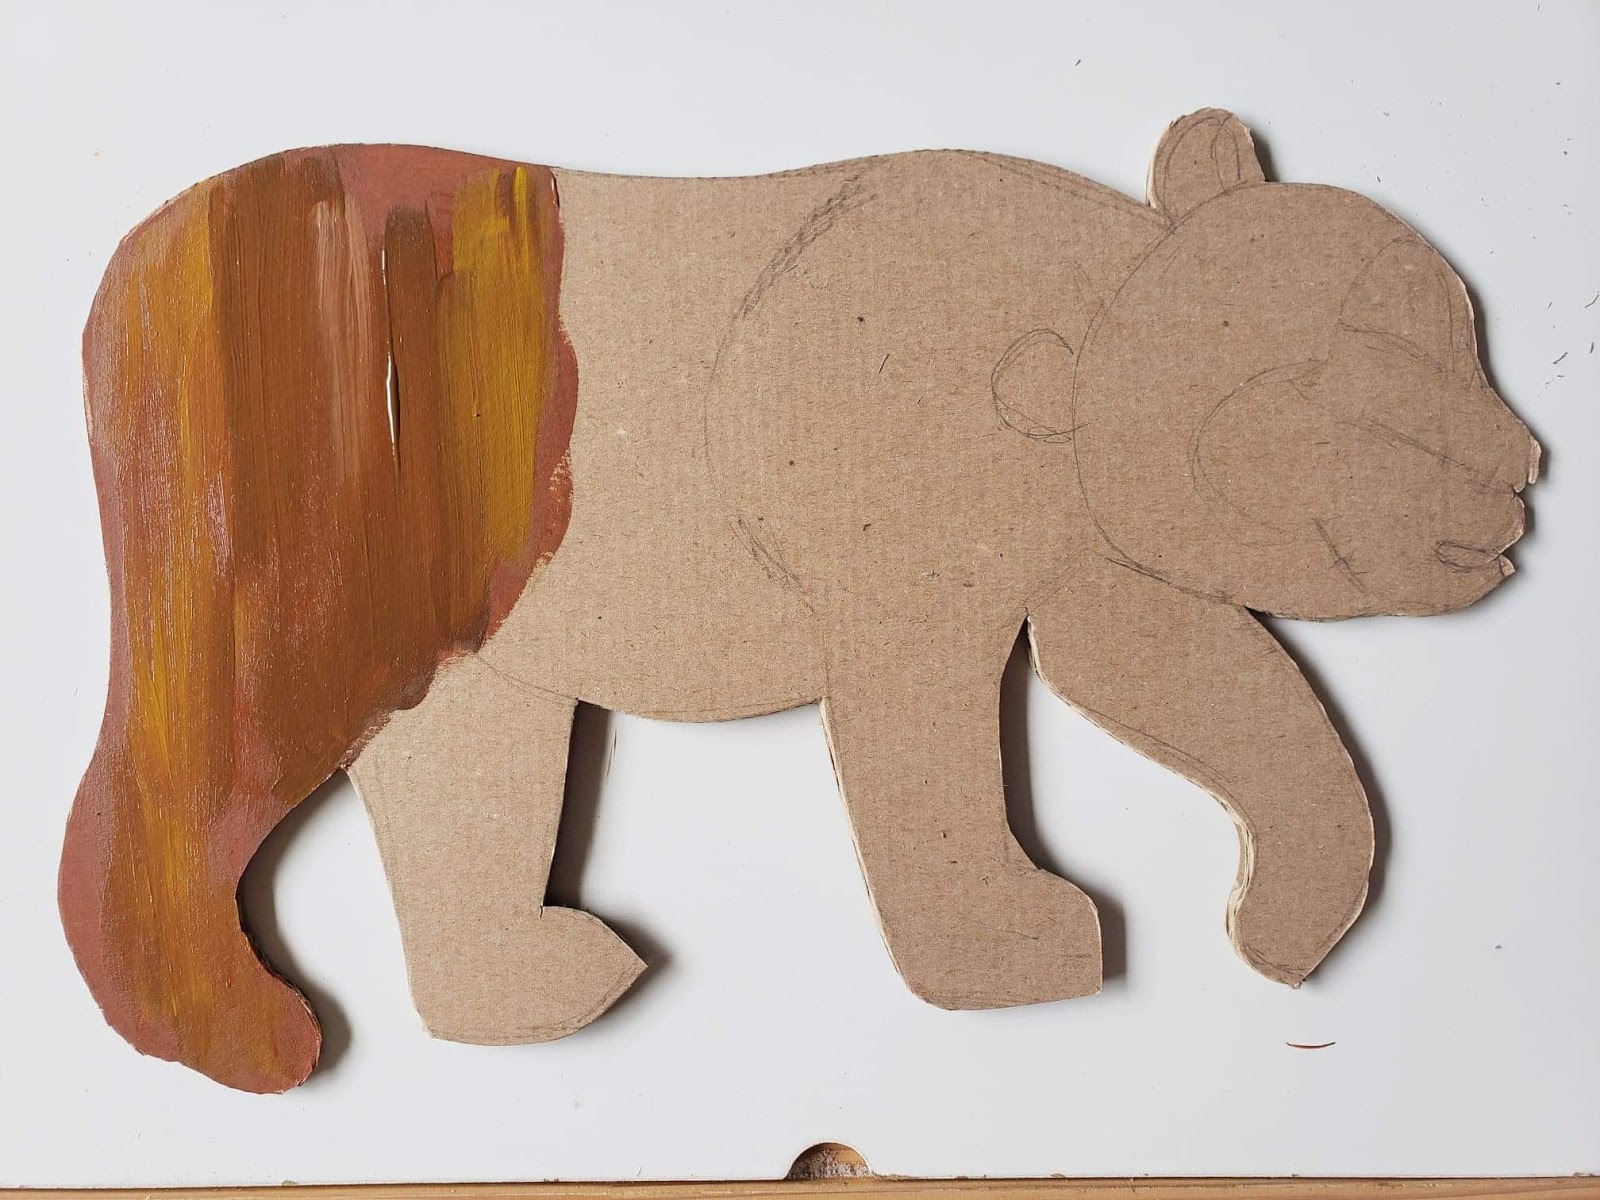 brown bear brown bear what do you see sensory puzzle